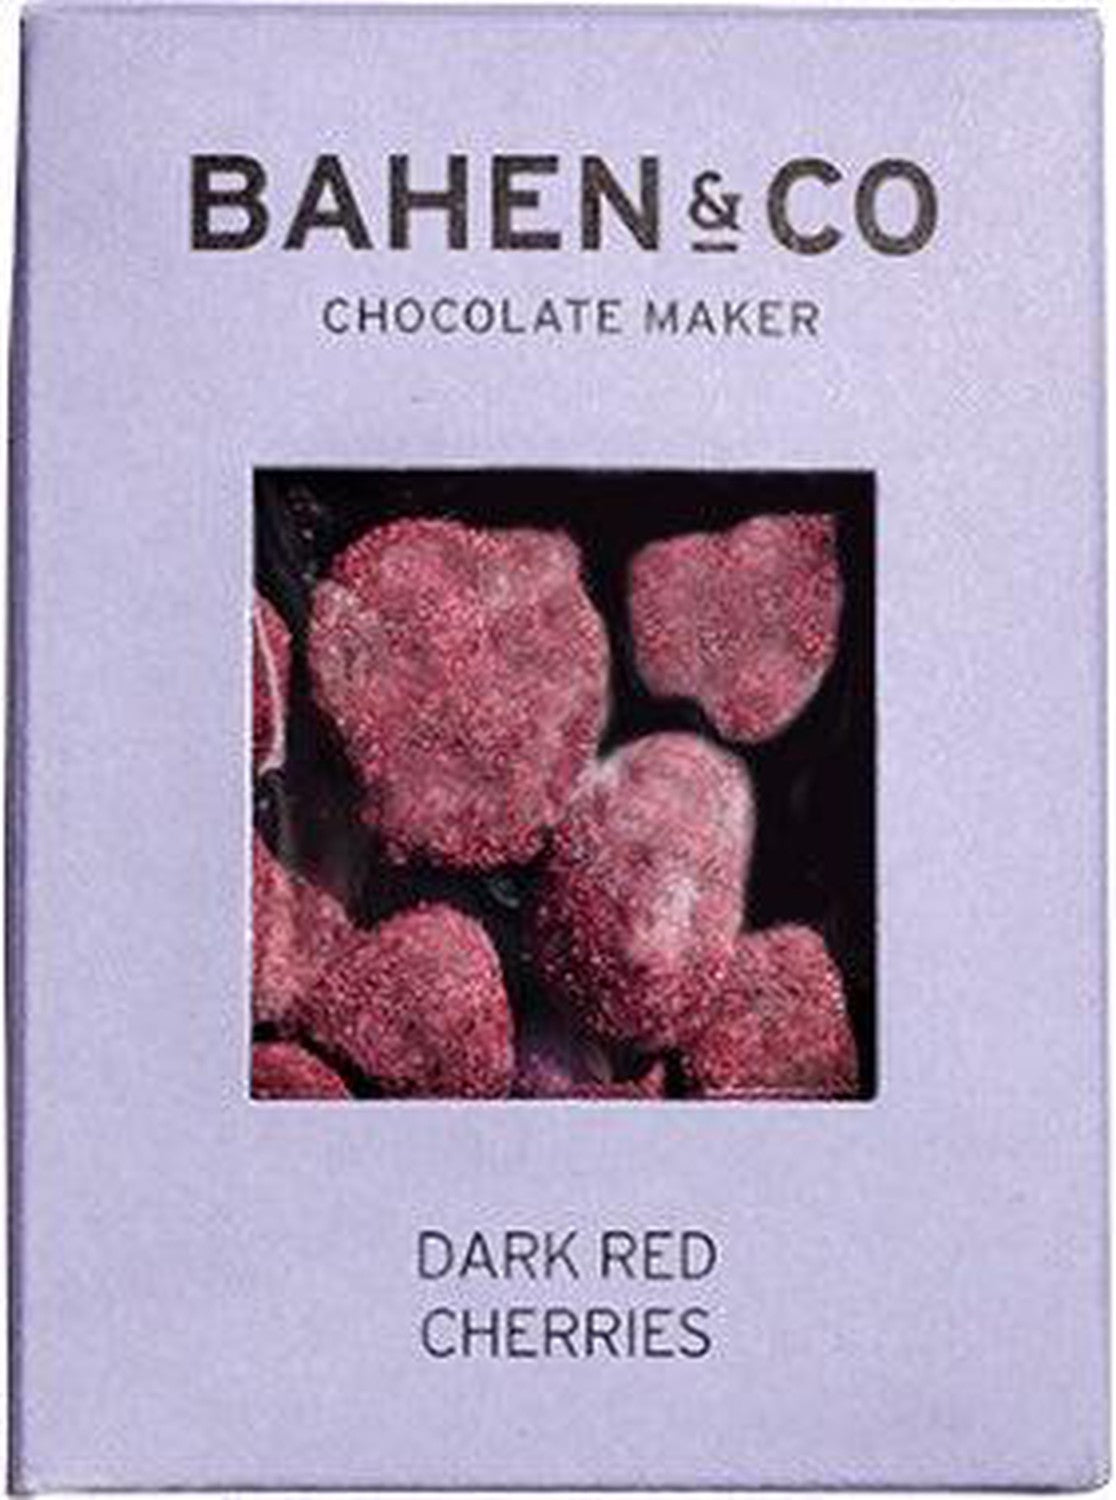 Bahen and Co - Dark Red Cherries